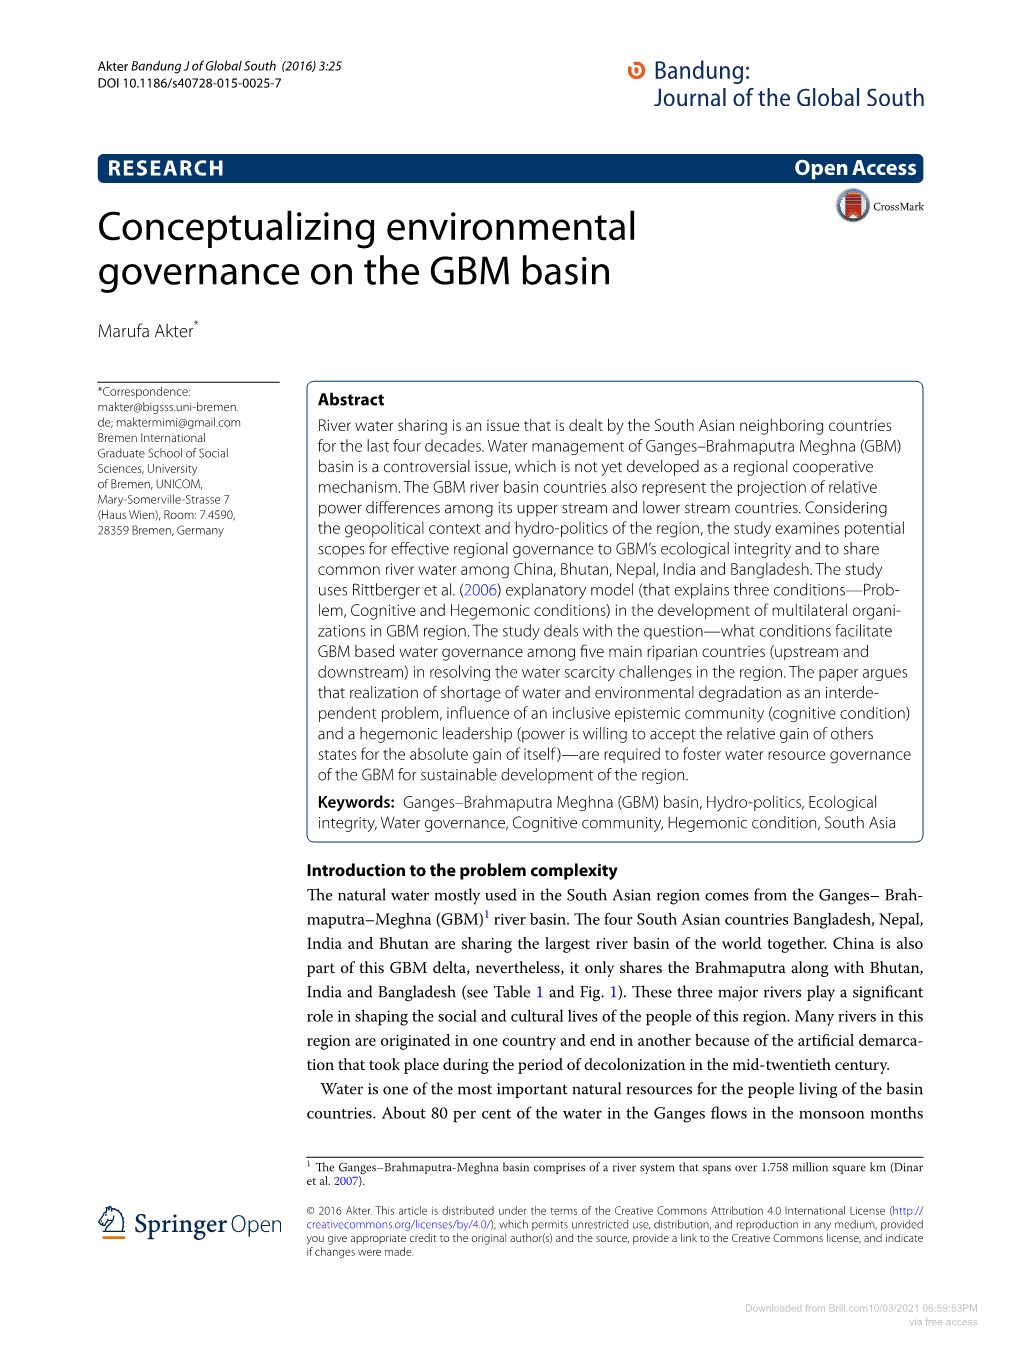 Conceptualizing Environmental Governance on the GBM Basin